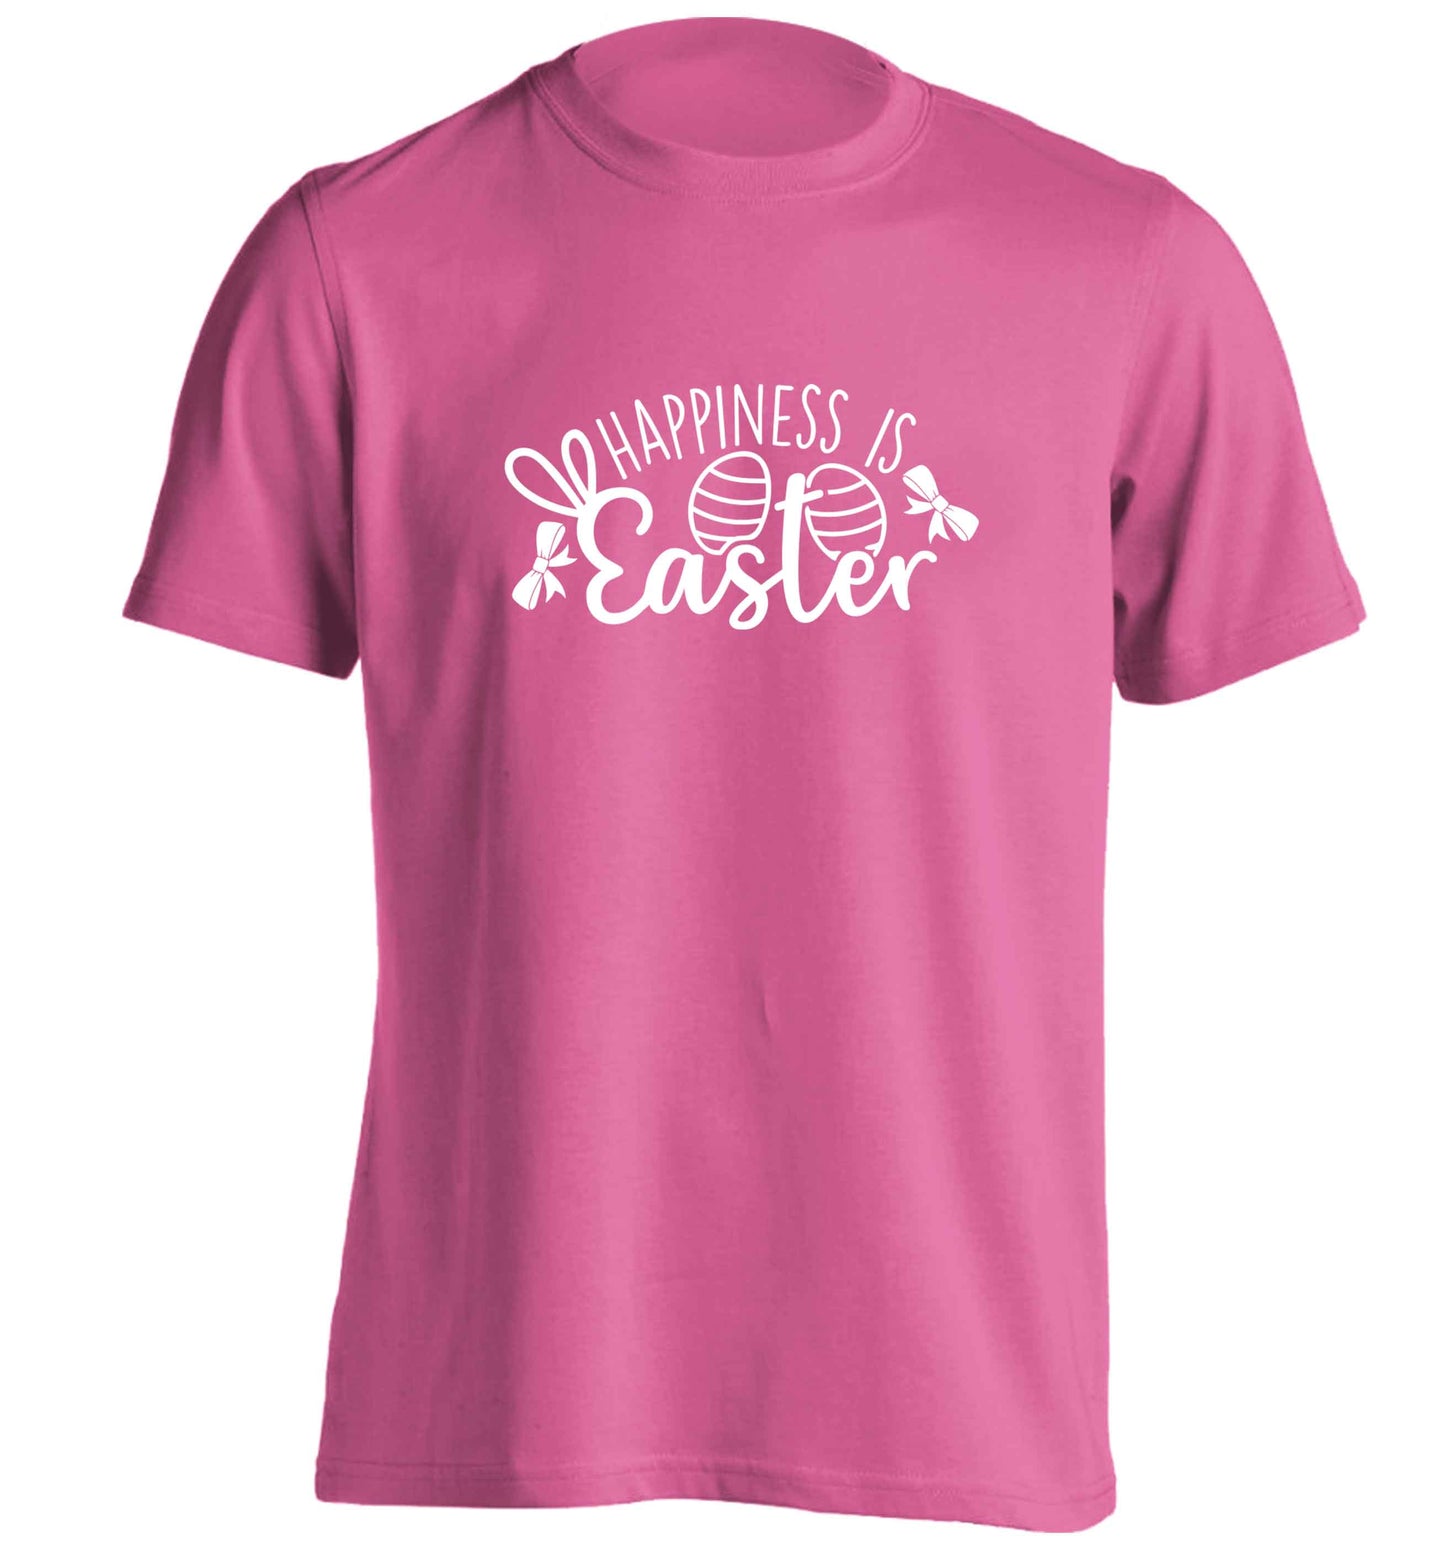 Happiness is easter adults unisex pink Tshirt 2XL